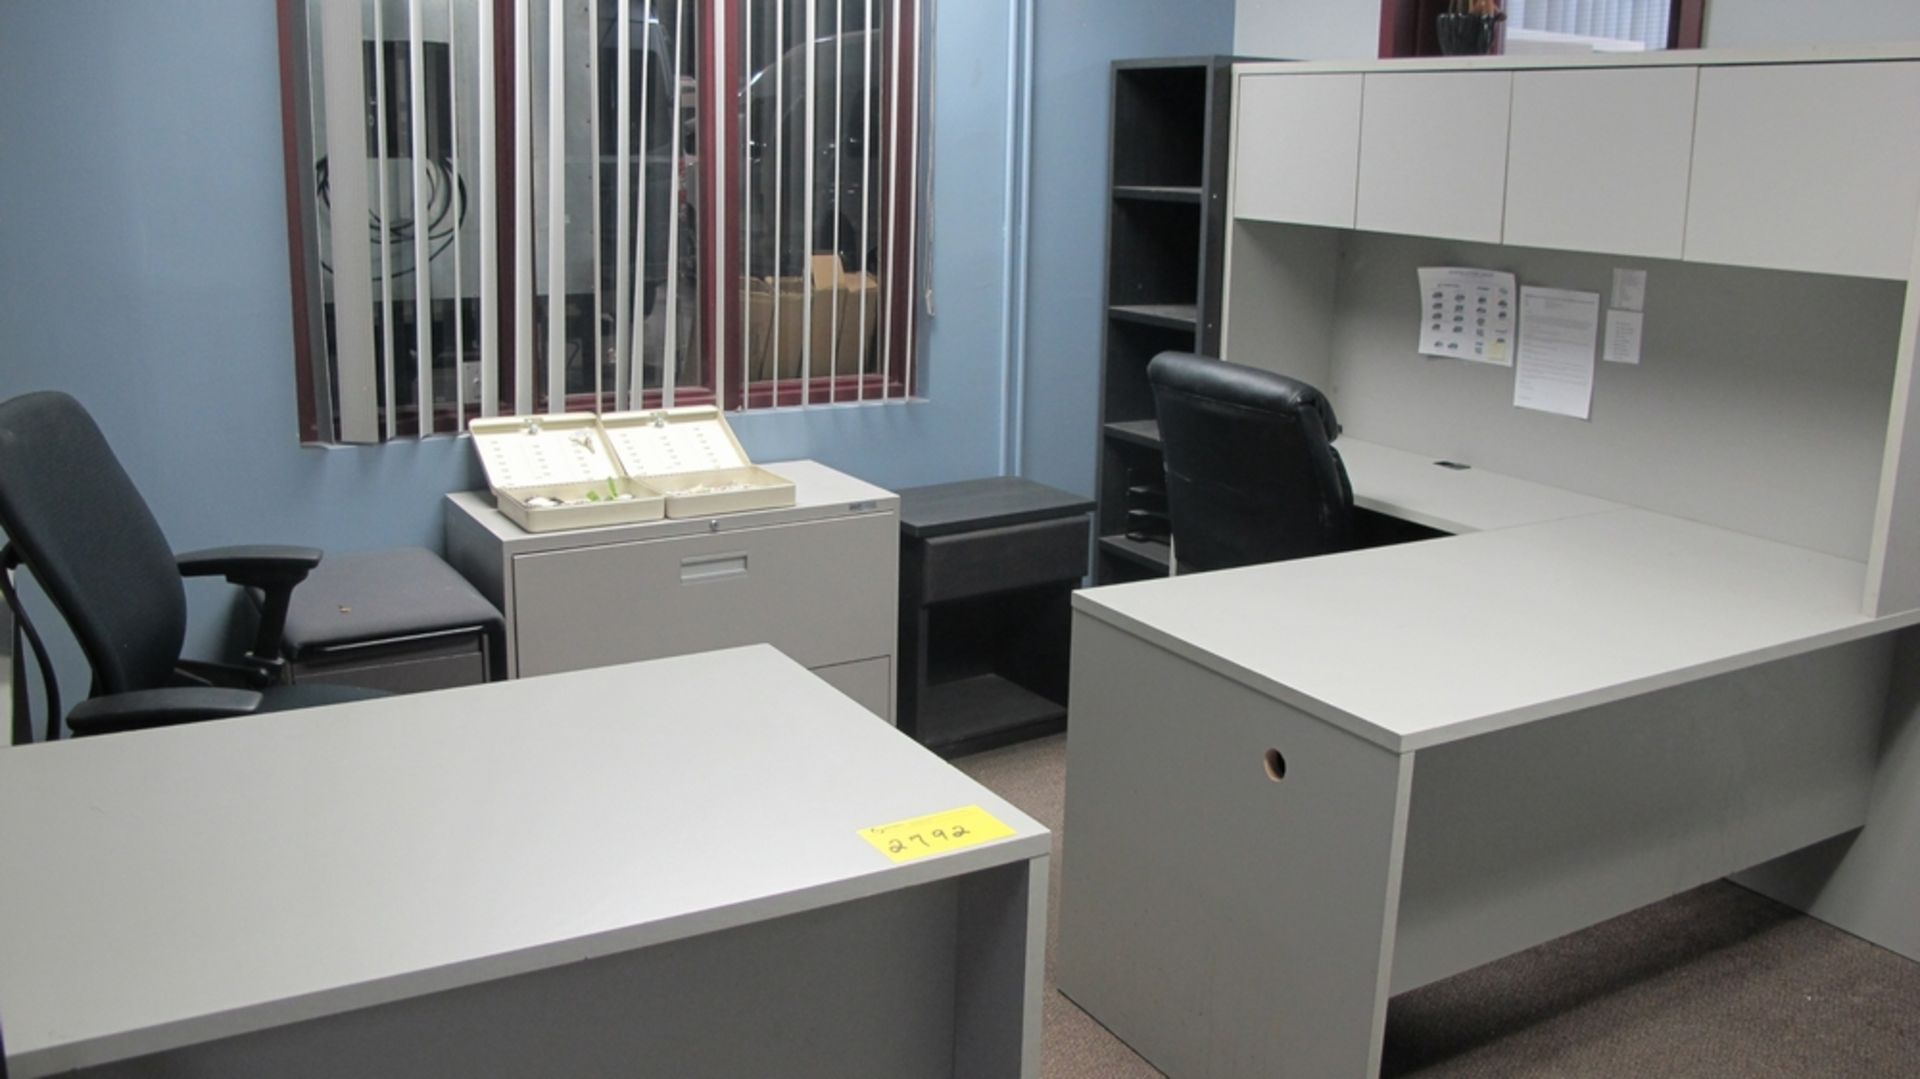 LOT OF 2 L SHAPED WORK STATIONS, 2 CHAIRS, FOLDING TABLE, 2 FILE CABINETS, BOOKCASE AND ARTIFICIAL